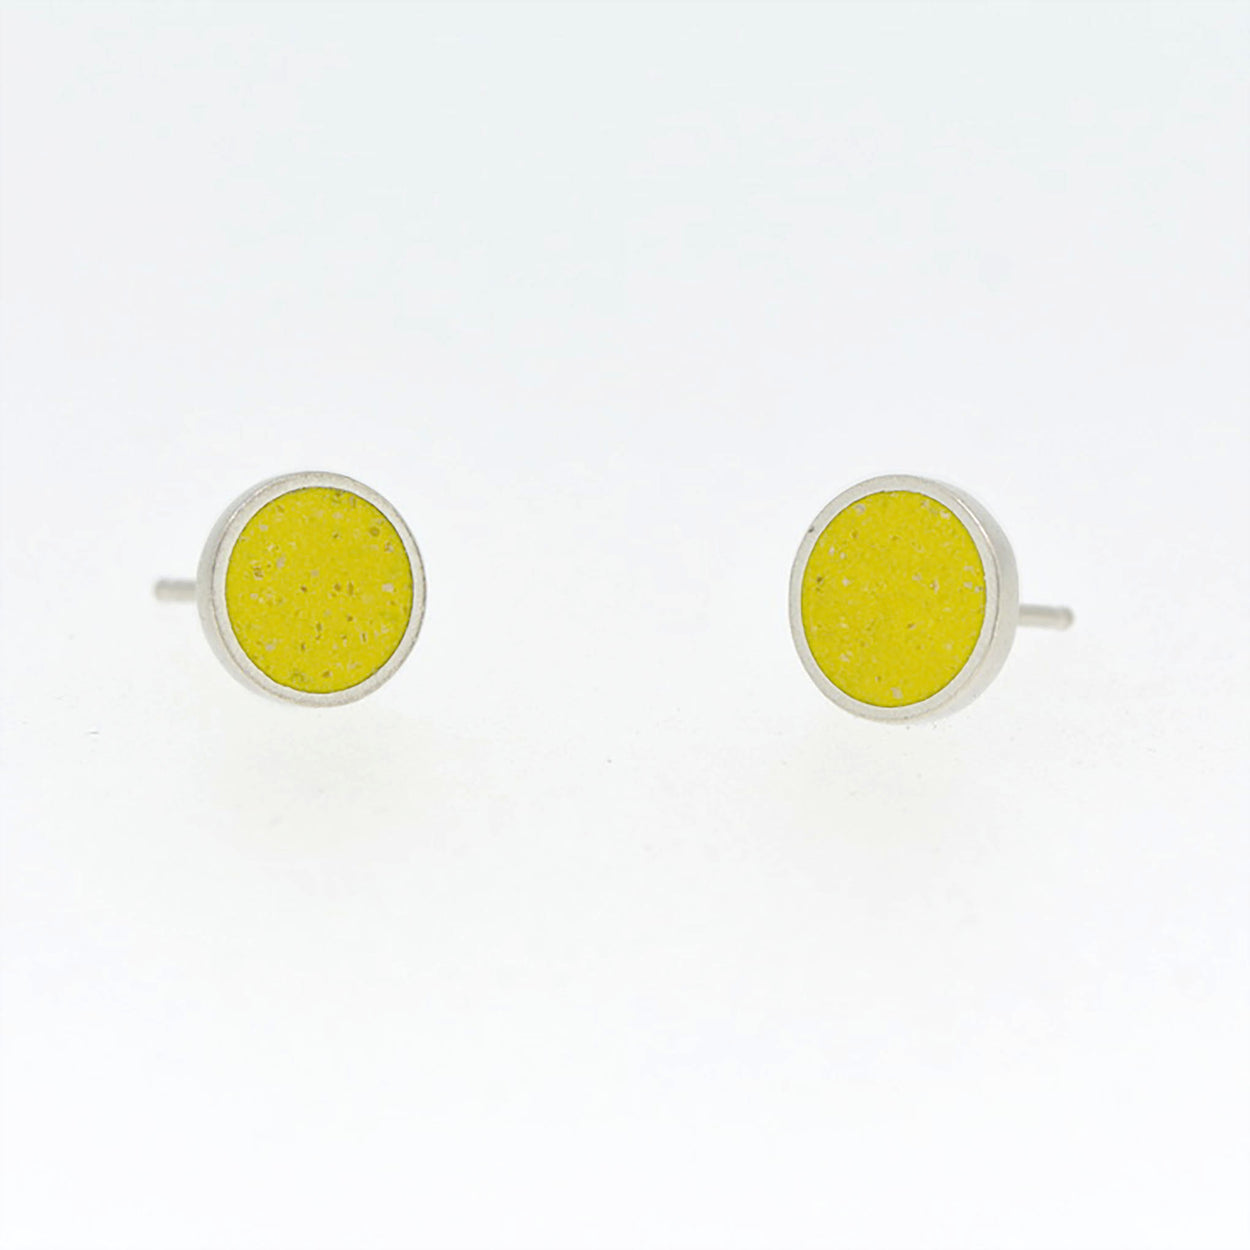 Small Stud Earrings SILVER + CONCRETE Yellow